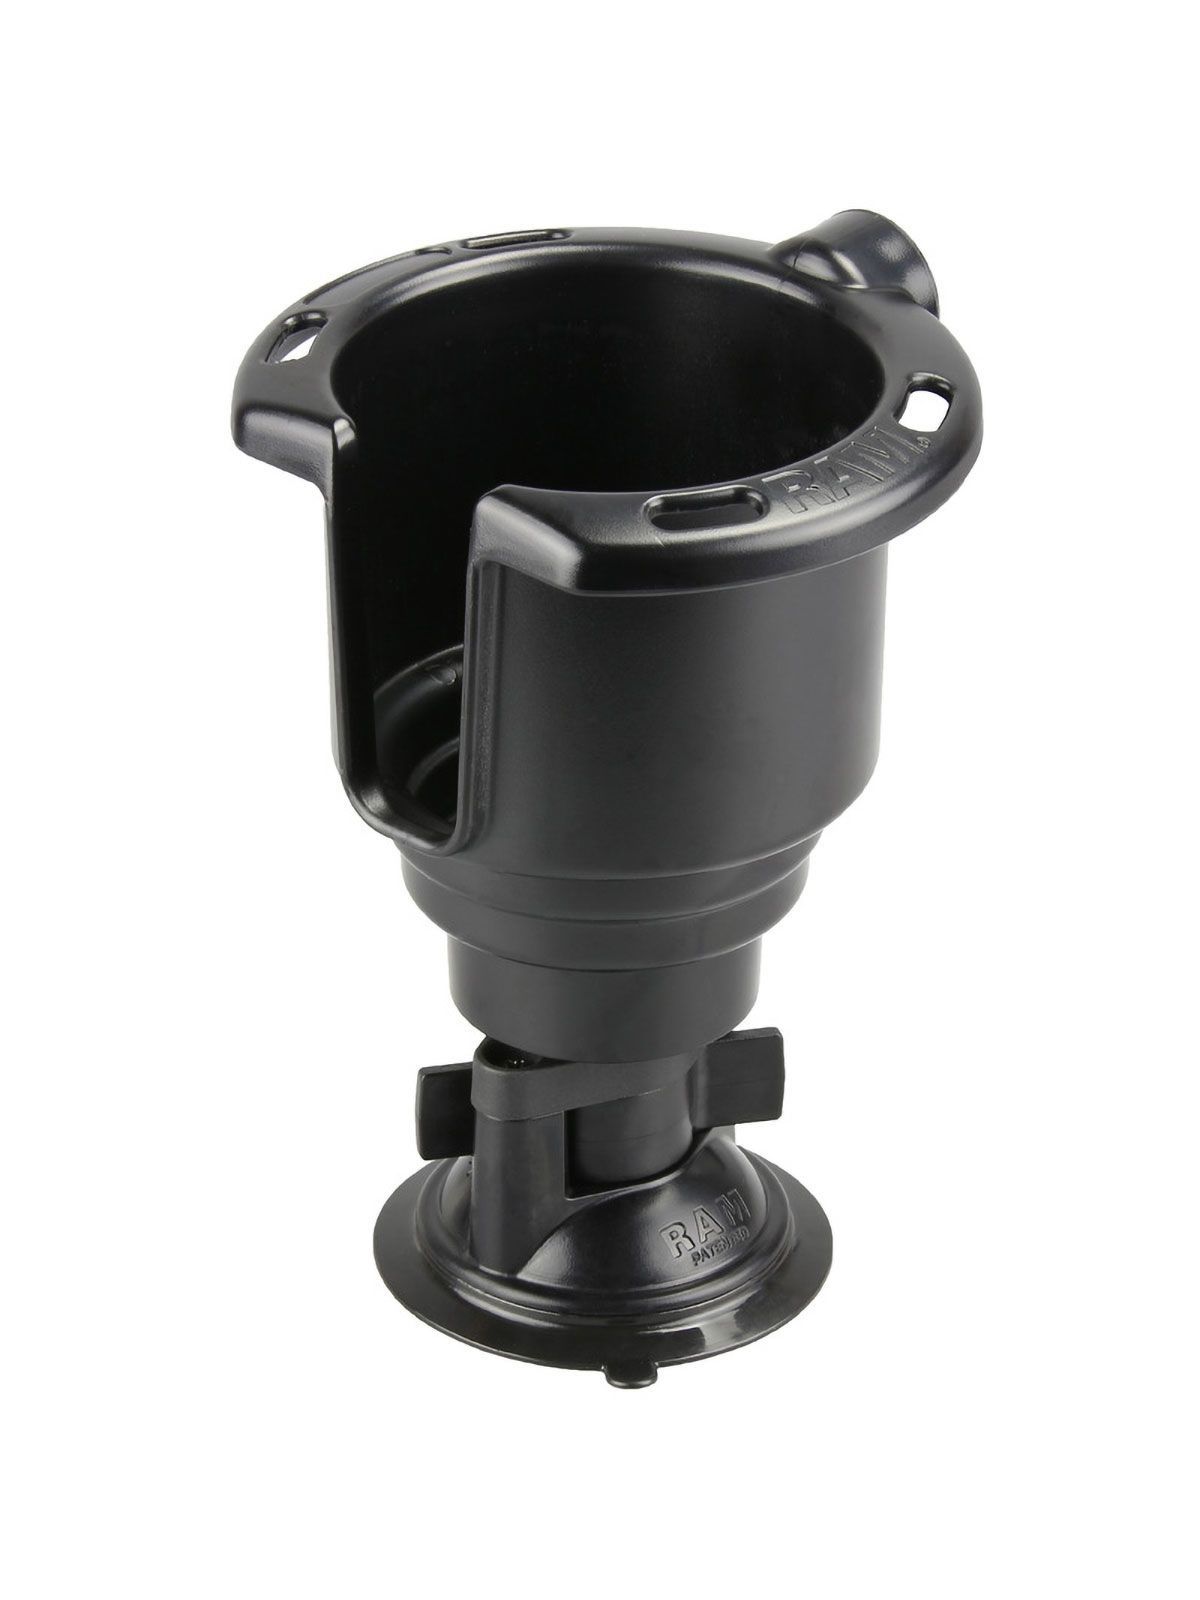 RAM Mounts Twist-Lock Suction Cup with Drink Cup Holder